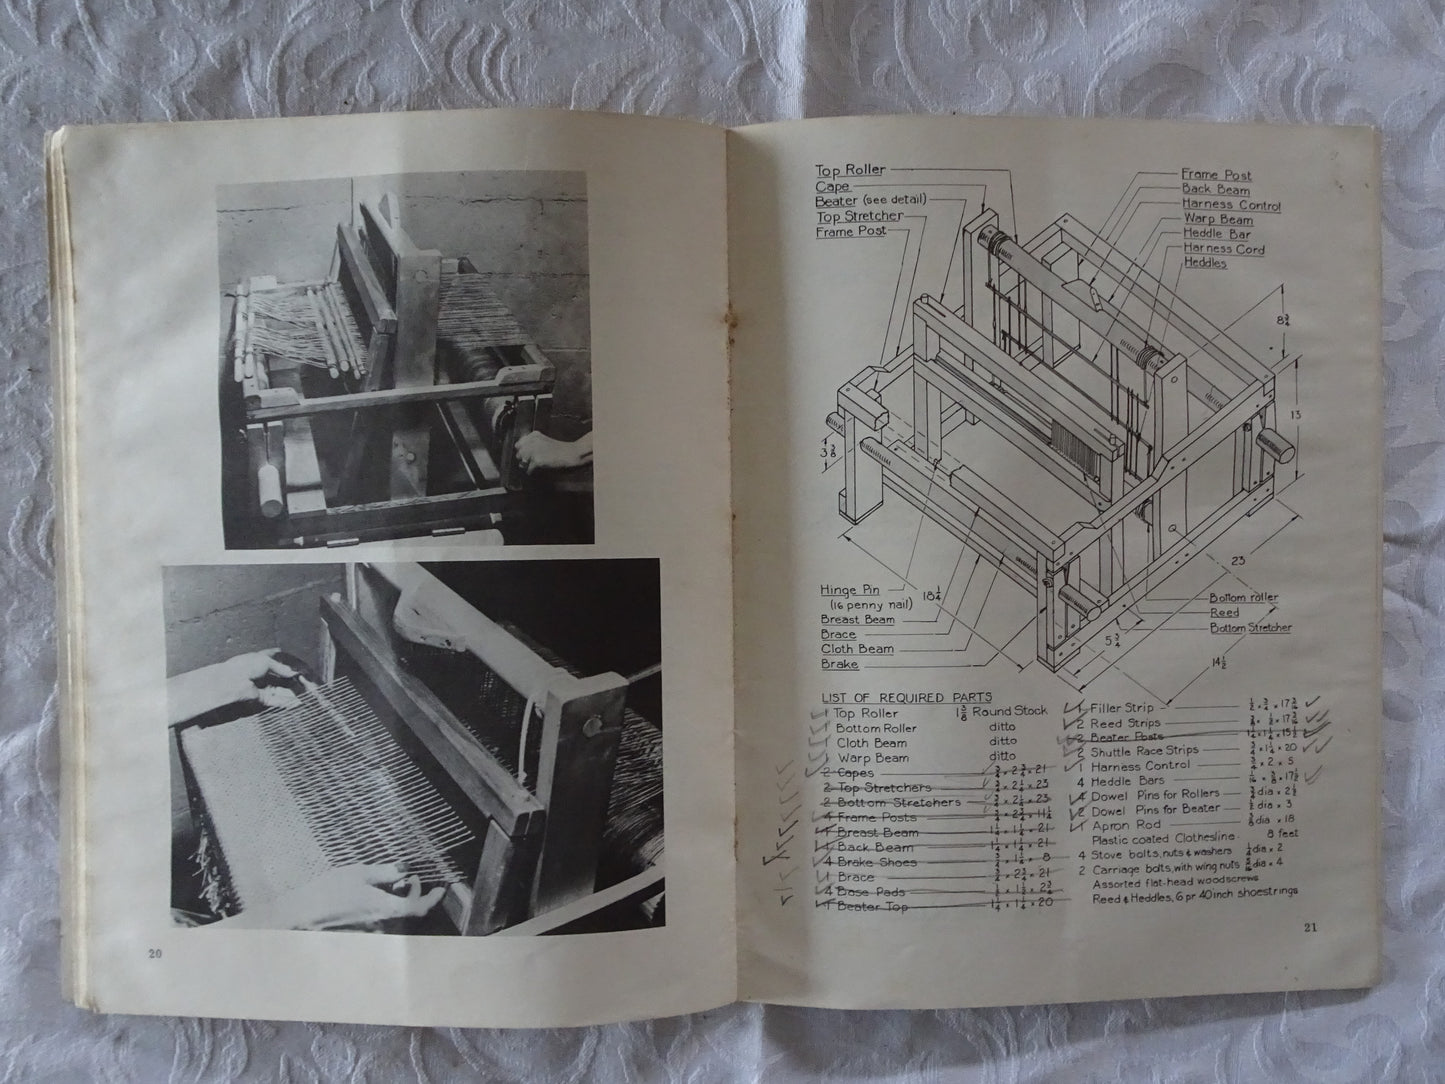 Build or Buy A Loom and Patterns For Pick-Ups by Harriet Tidball